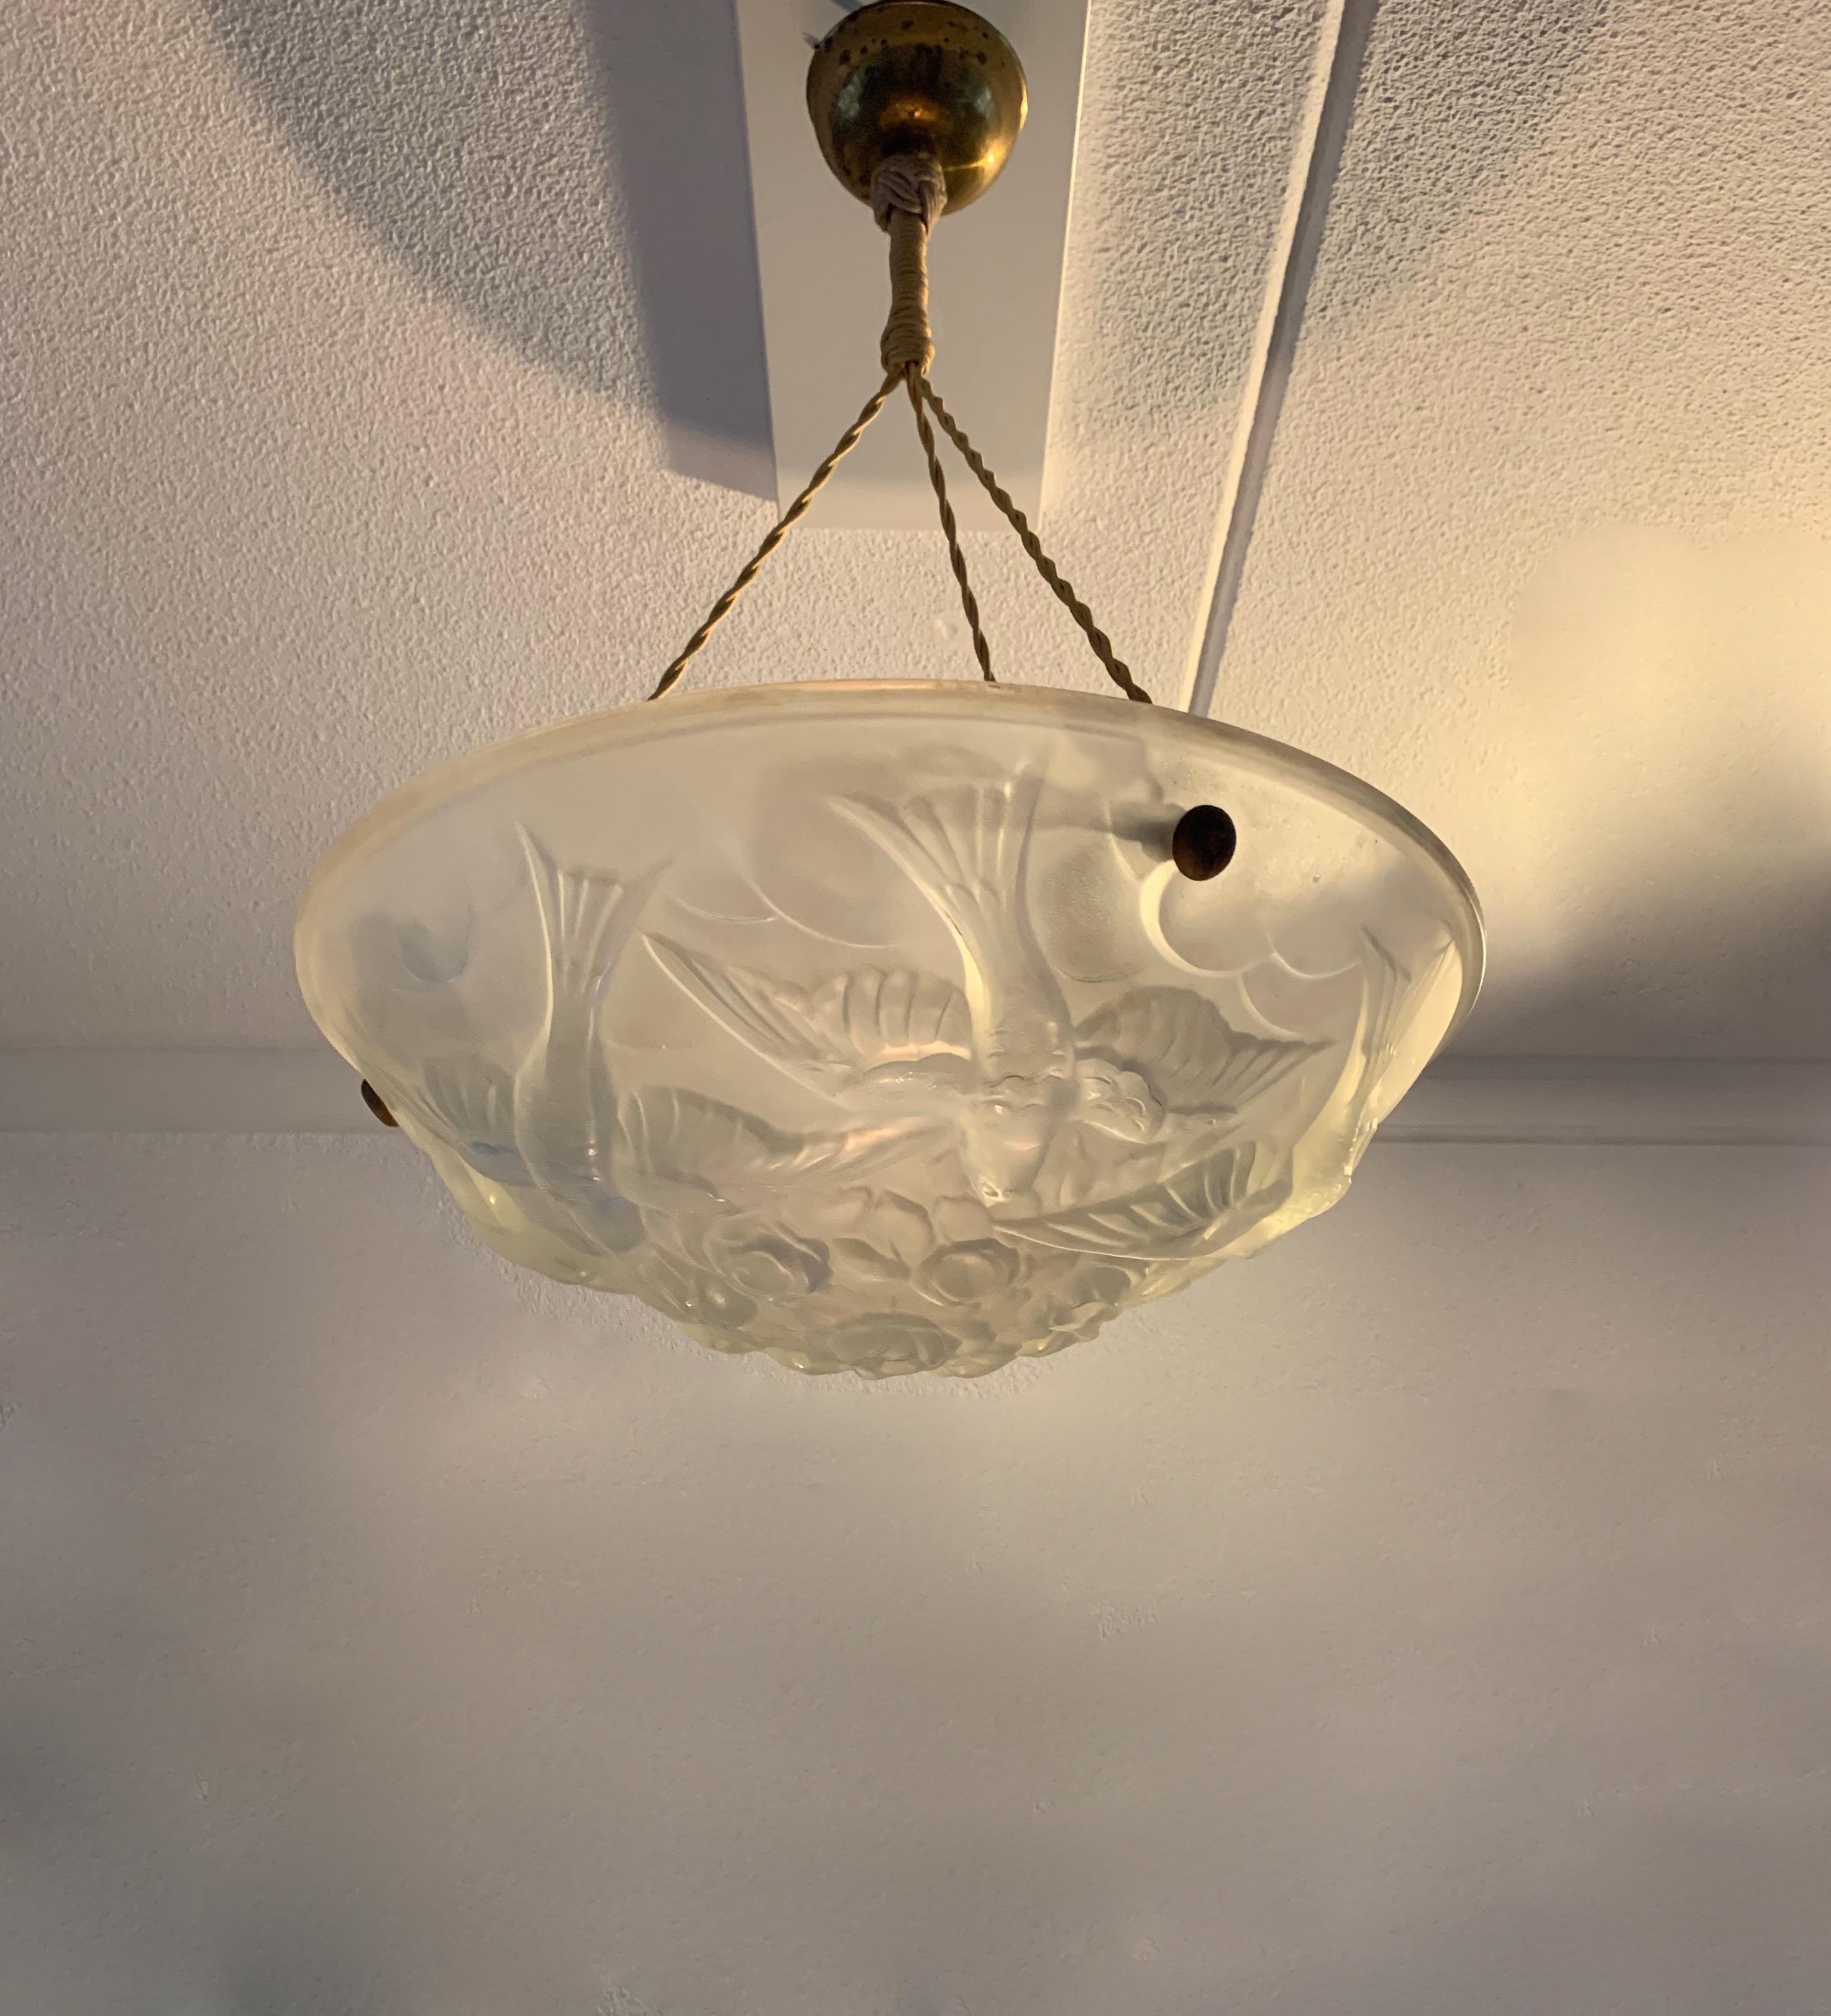 20th Century Stylish & Meaningful Art Deco Chandelier, Frosted Glass w. Flying Pigeons Sabine